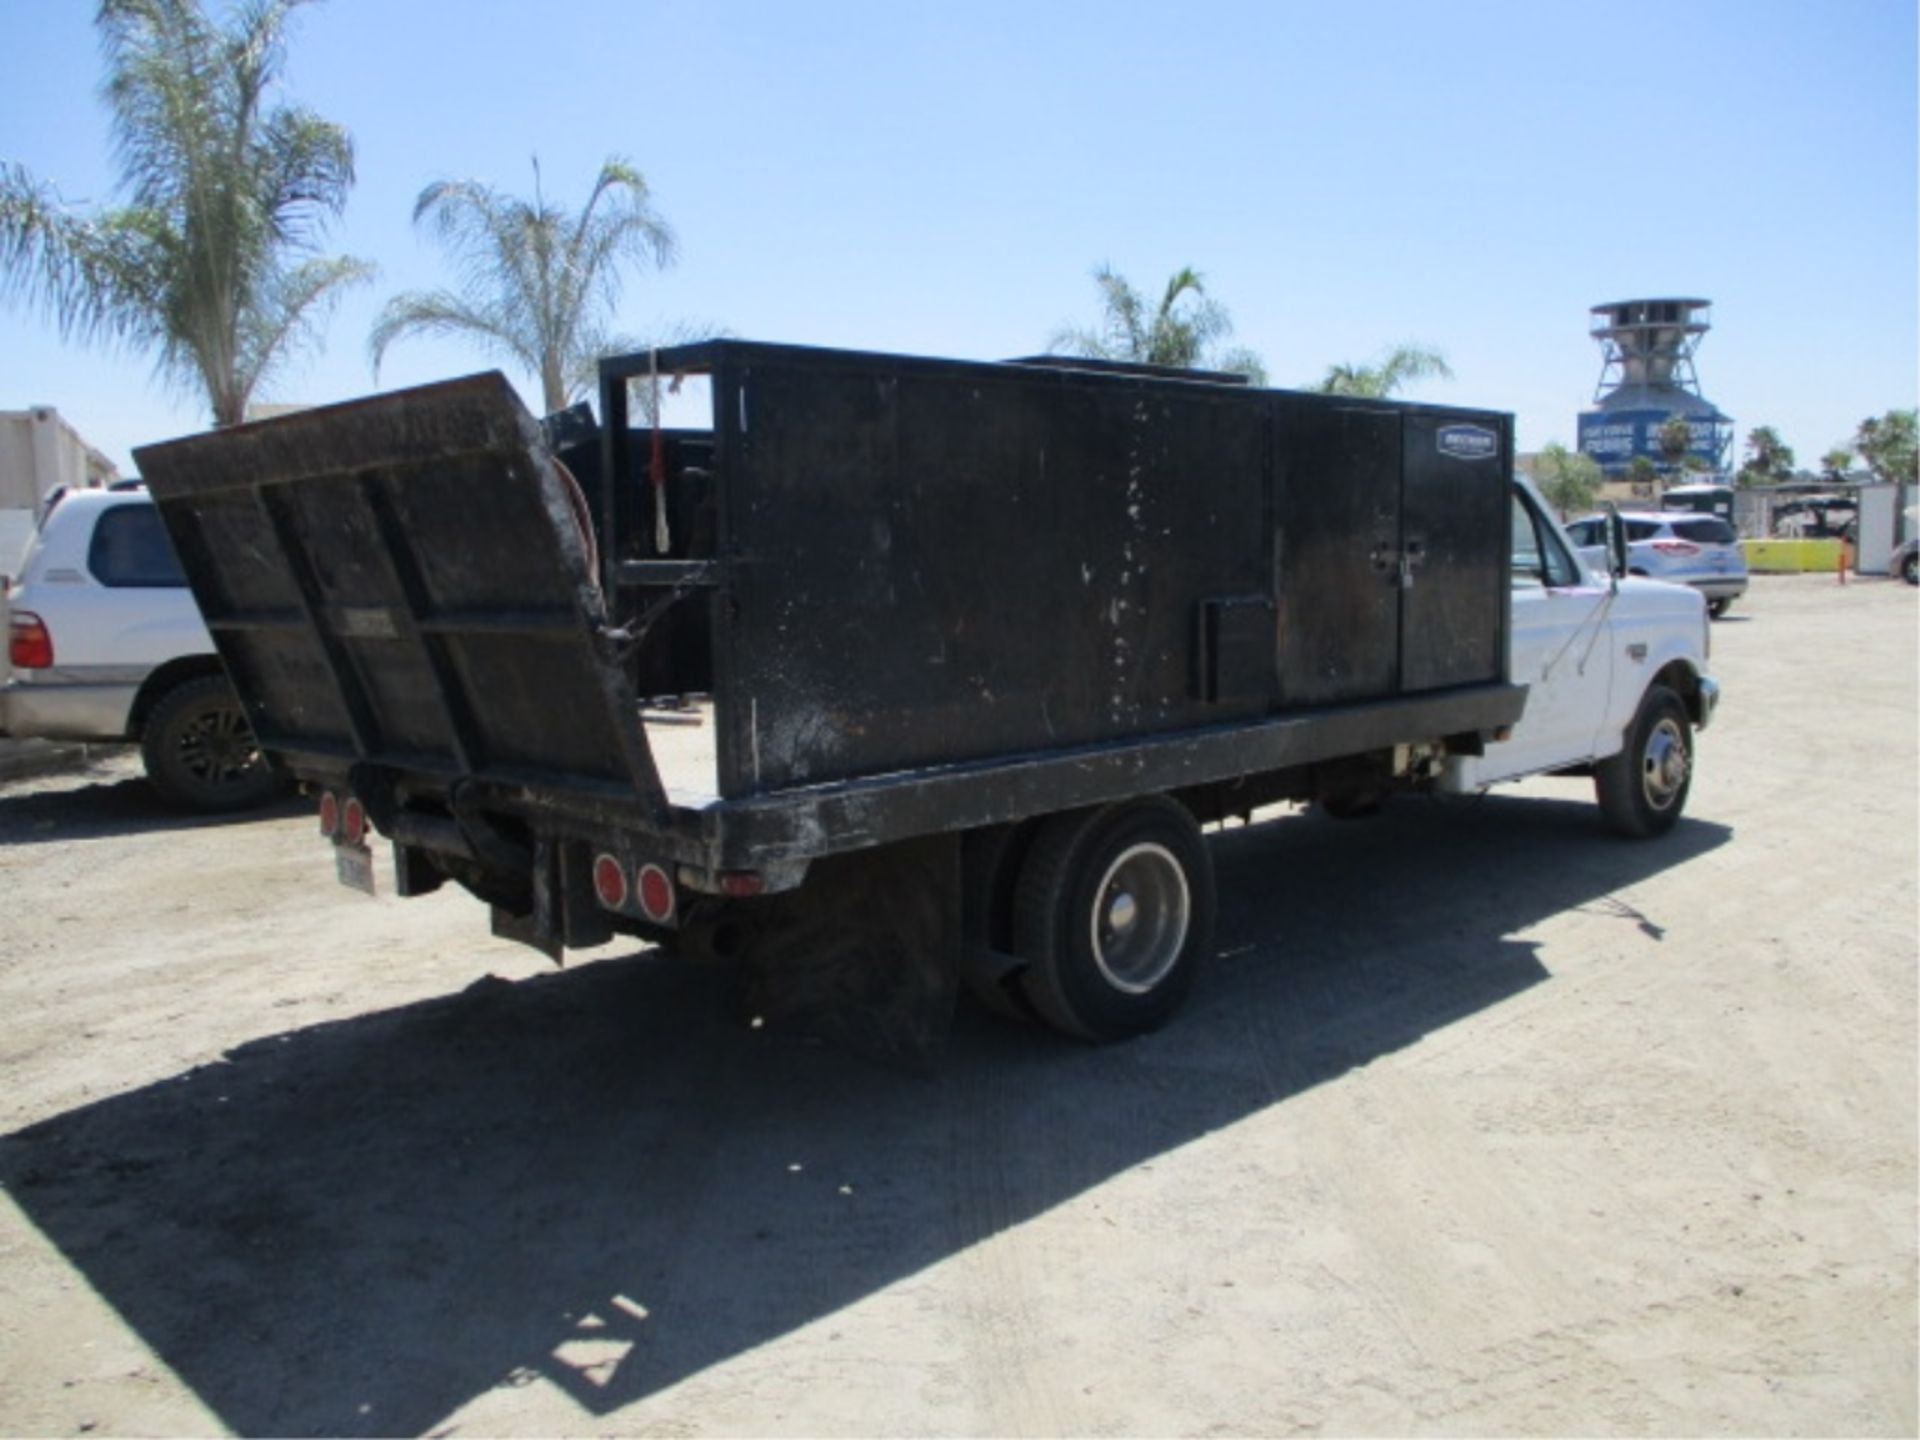 Ford F350 Saw Truck, 7.3L Power Stroke Diesel, Automatic, Waltco Lift Gate, Poly Water Tank, Storage - Image 3 of 12